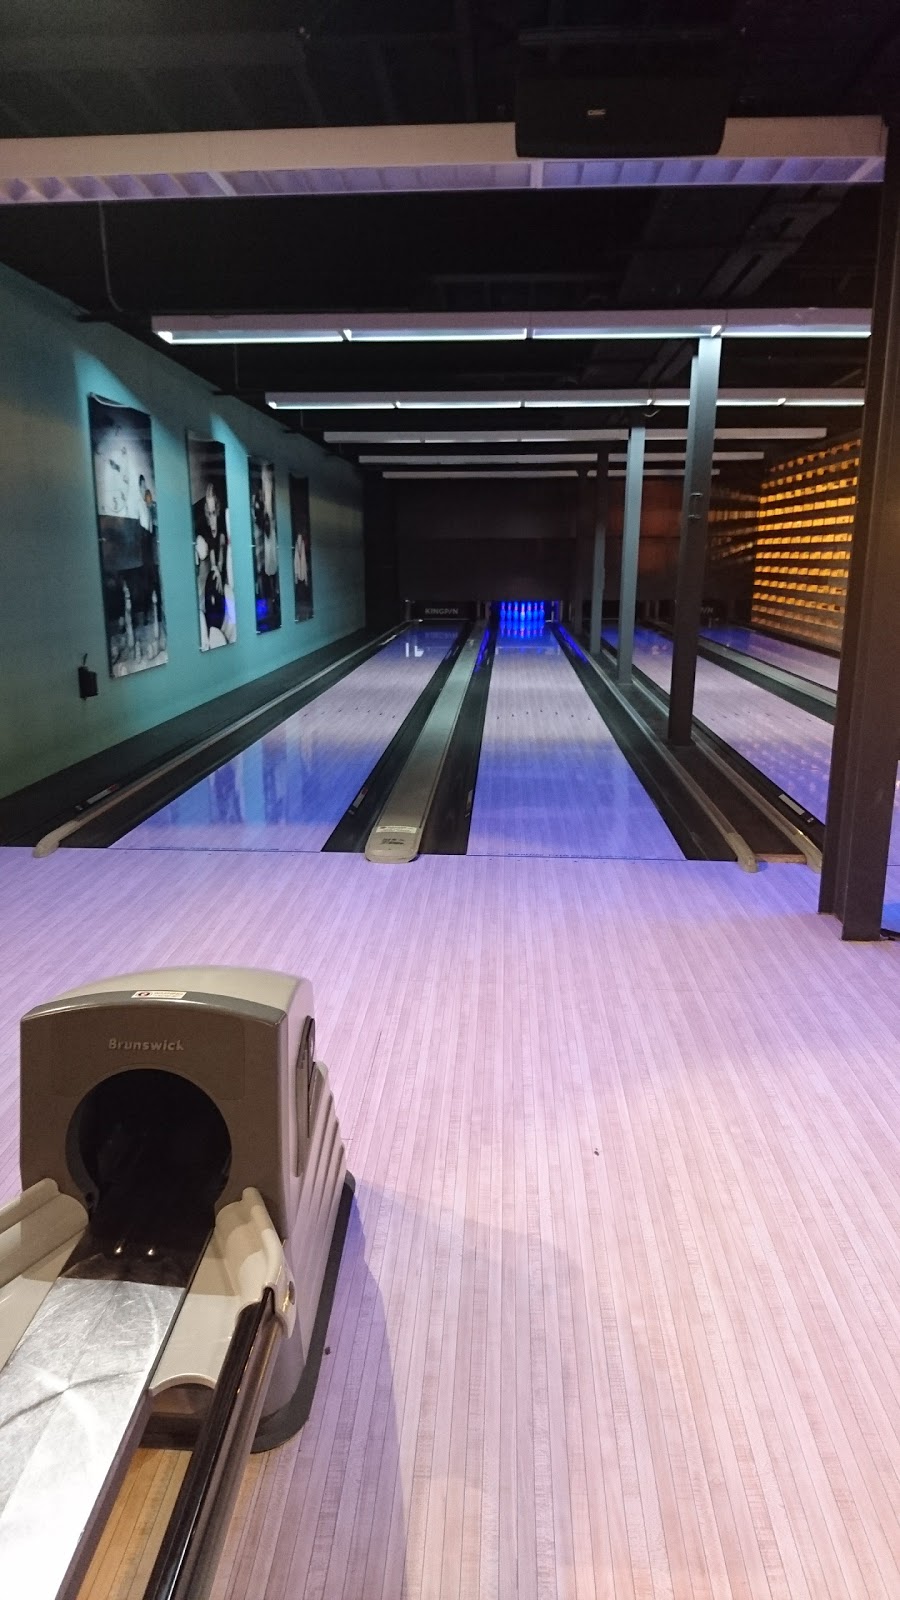 Kingpin Bowling North Strathfield | bowling alley | Building H3/3-5 George St, North Strathfield NSW 2137, Australia | 132695 OR +61 132695